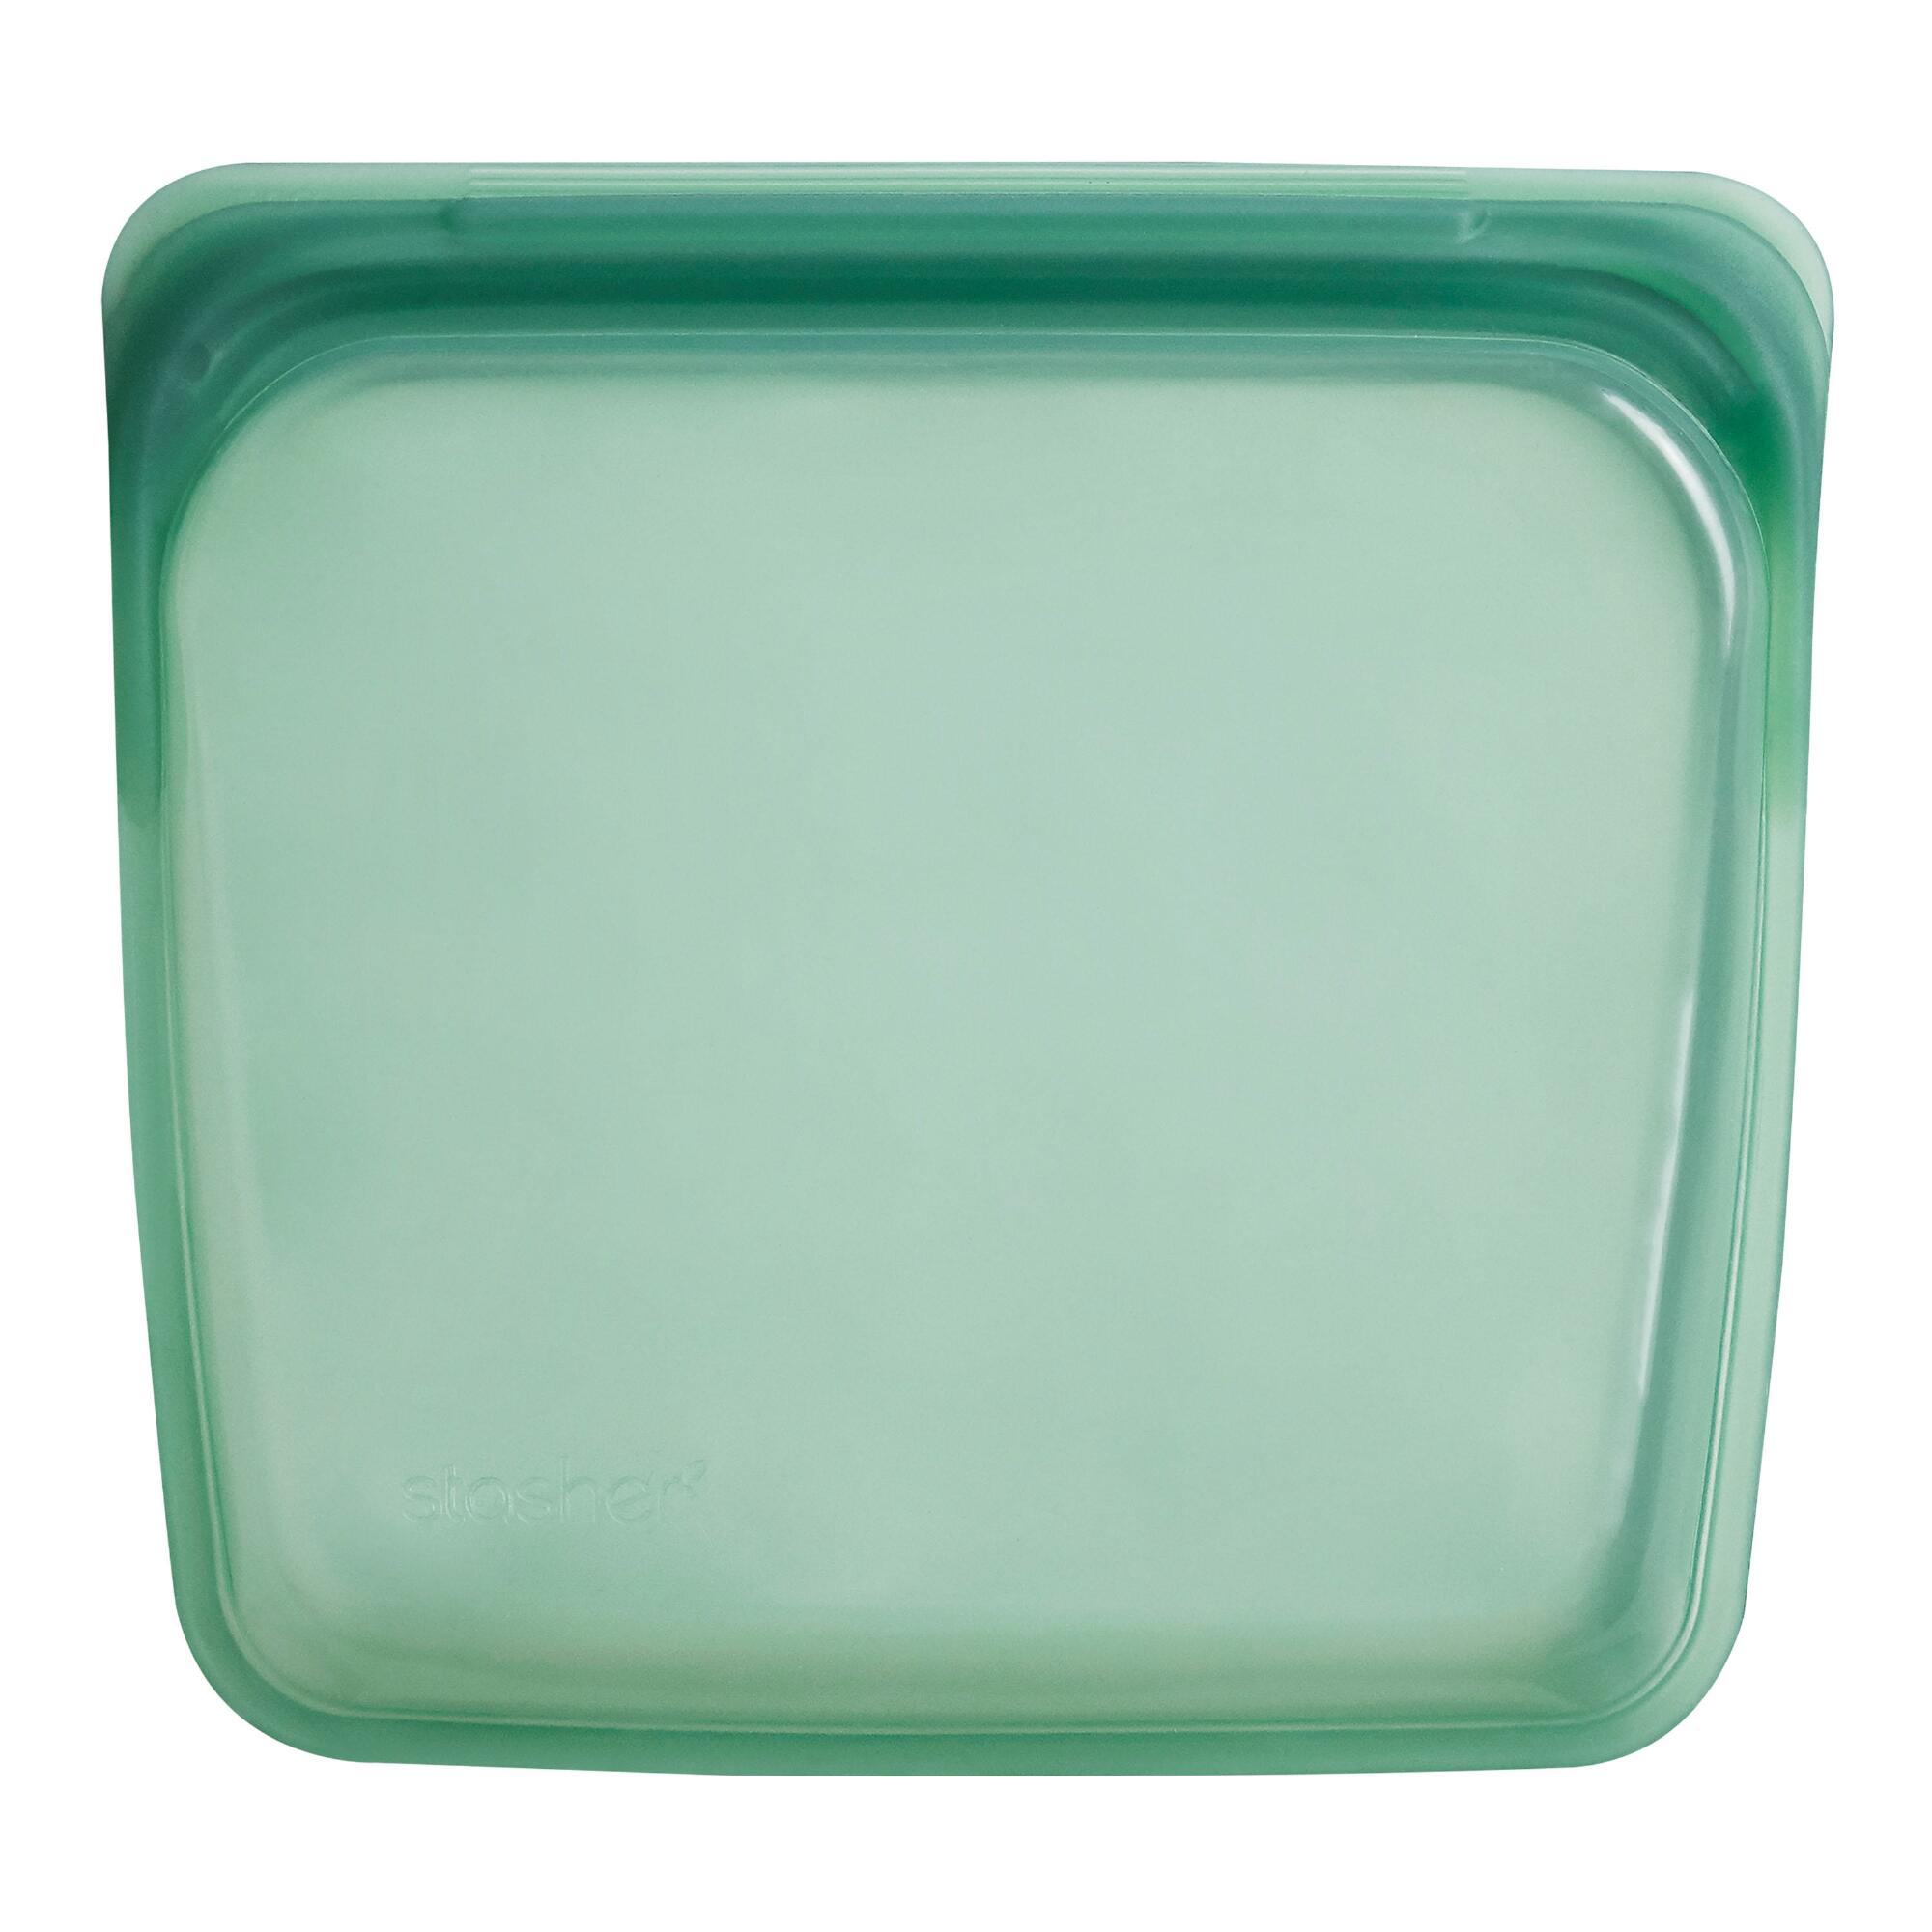 Stasher Agave Reusable Silicone Sandwich Bag: Green by World Market